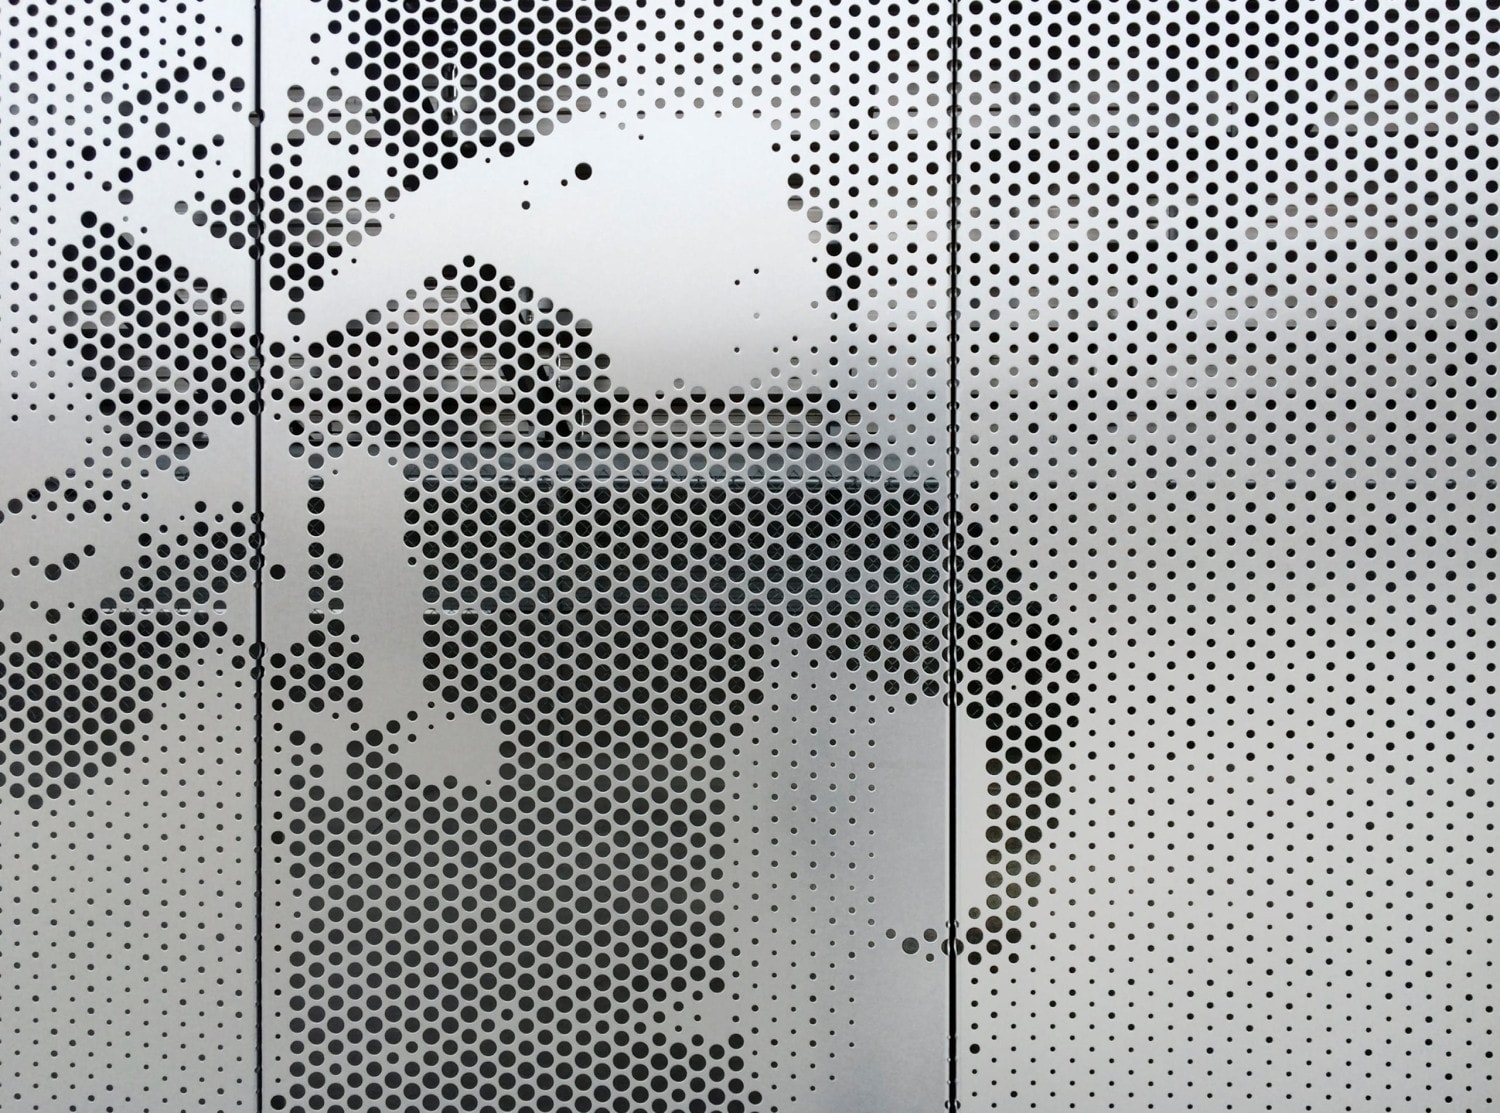 Cross-seam perforation is a standard feature of ImageWall perforated metal.